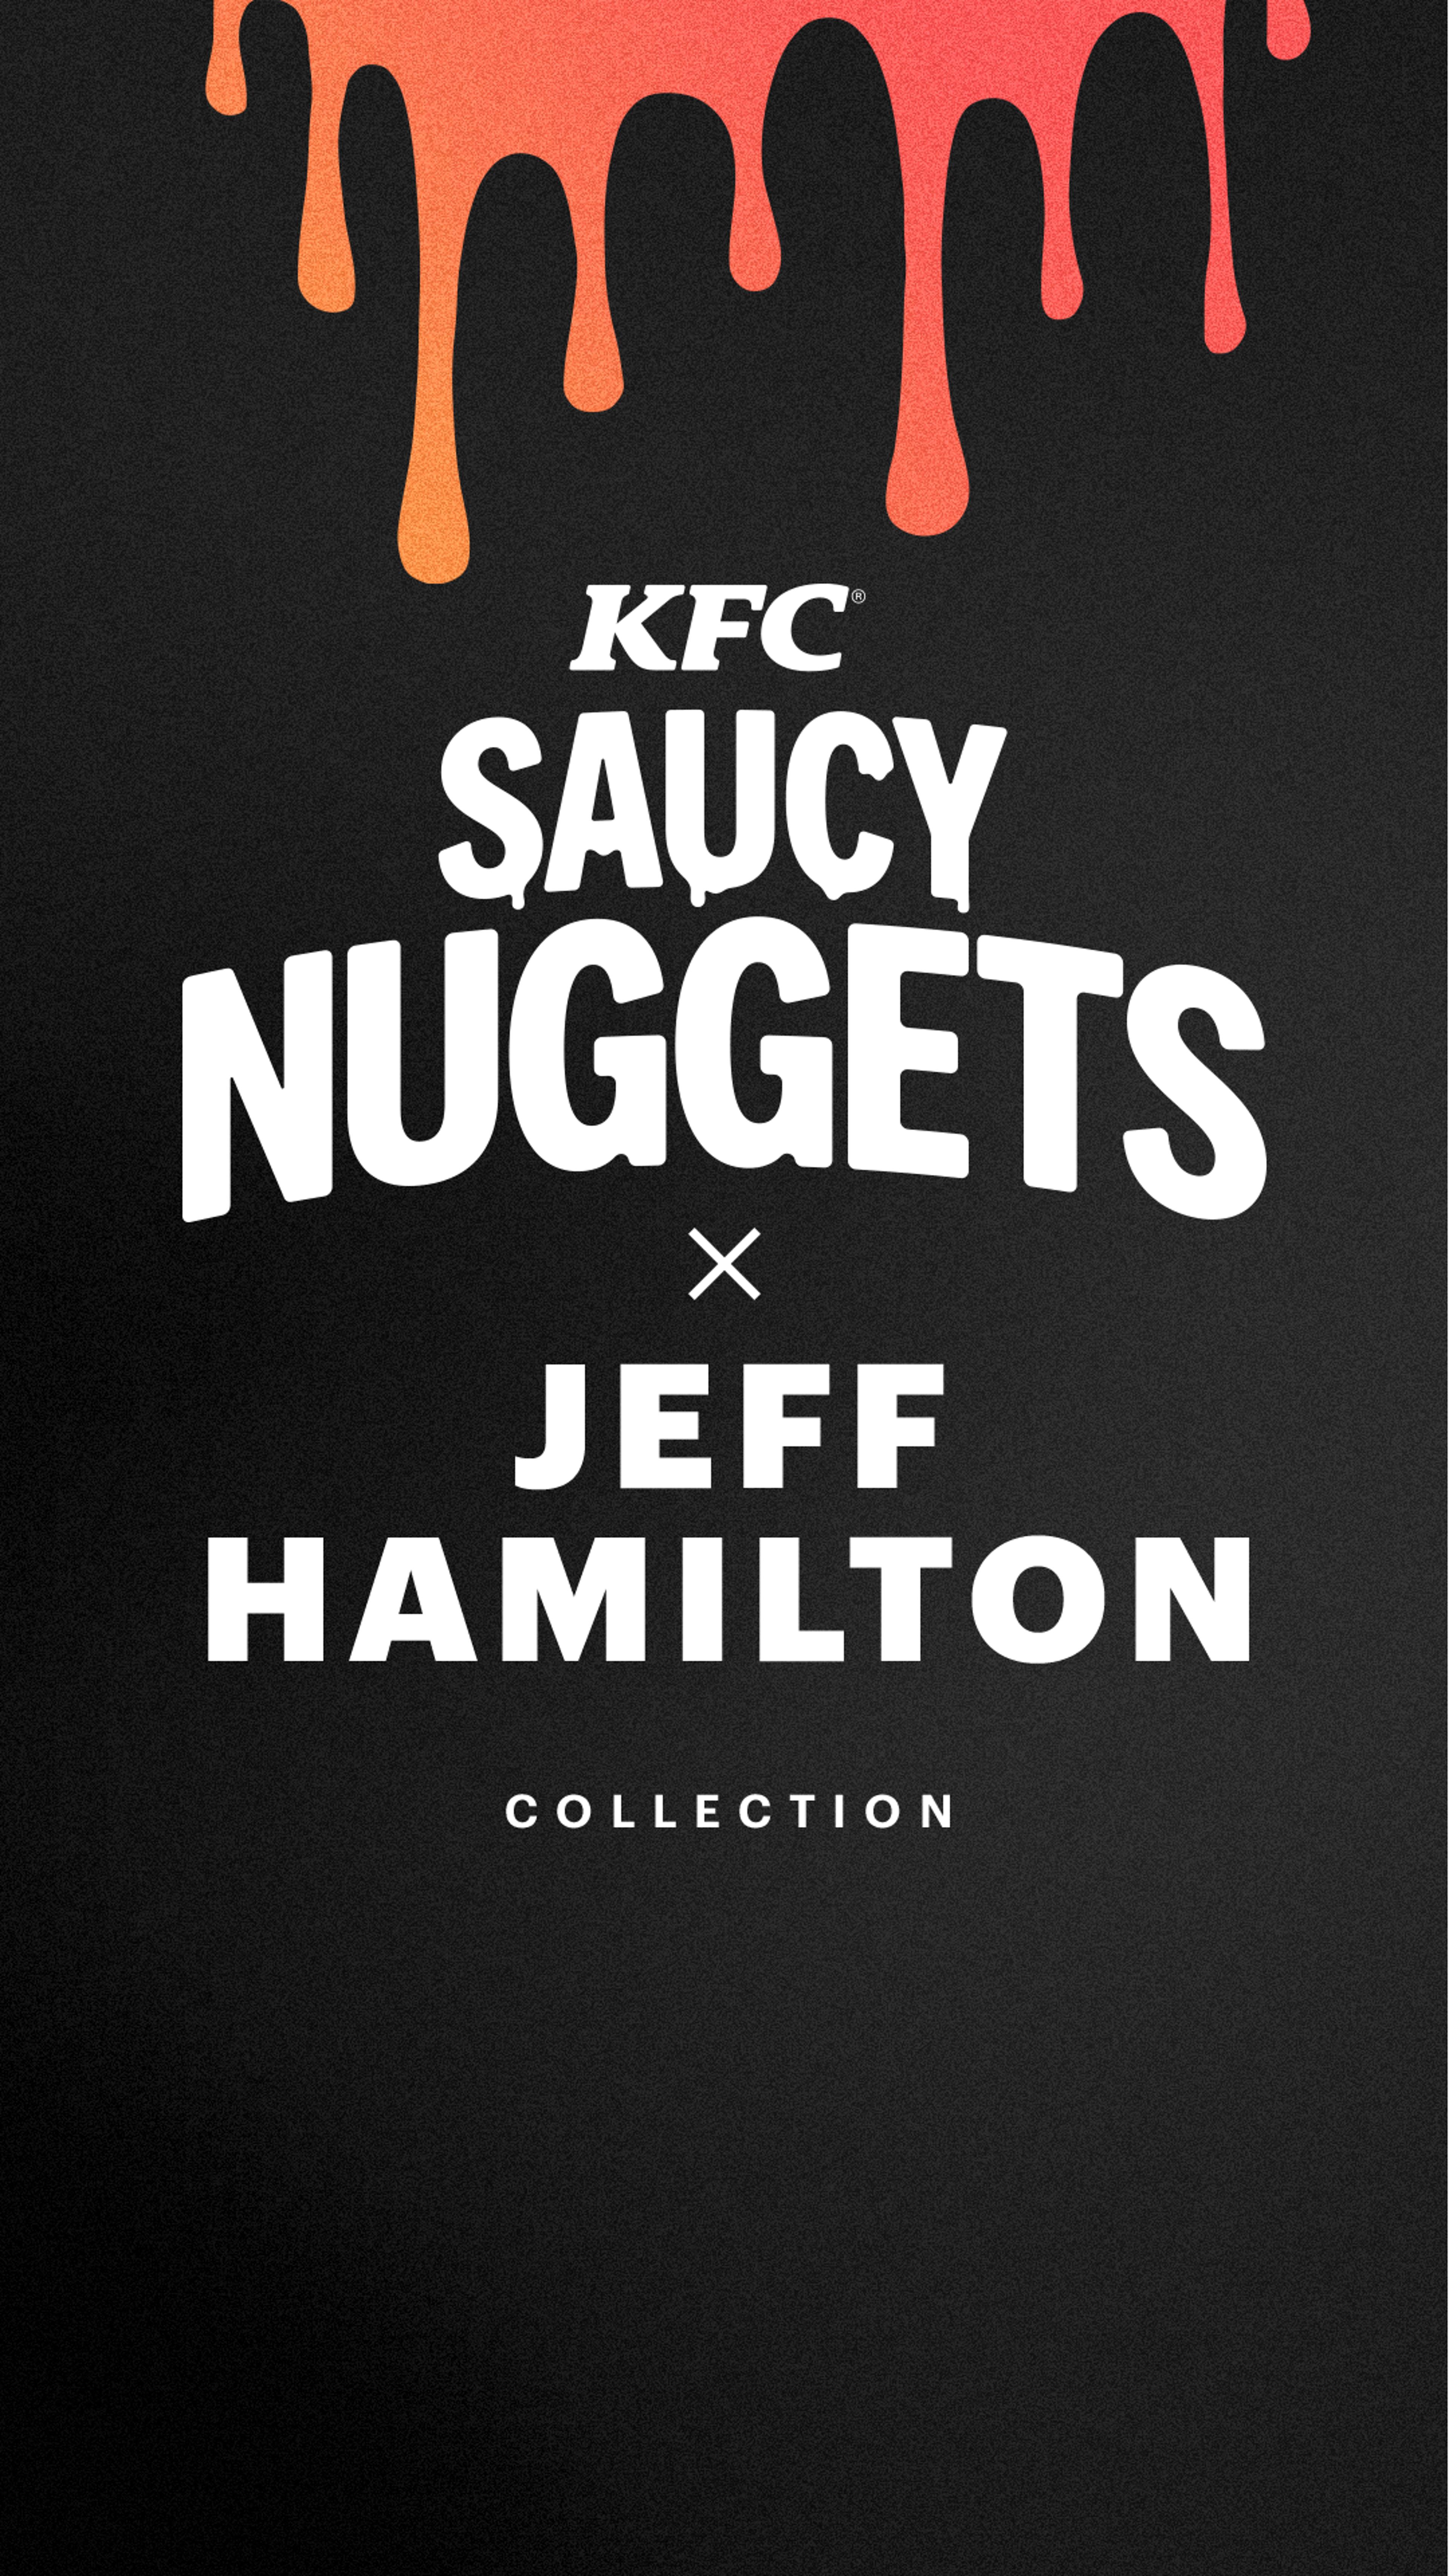 Preview image for the show titled "KFC Saucy Nuggets x Jeff Hamilton" at May 8, 2024